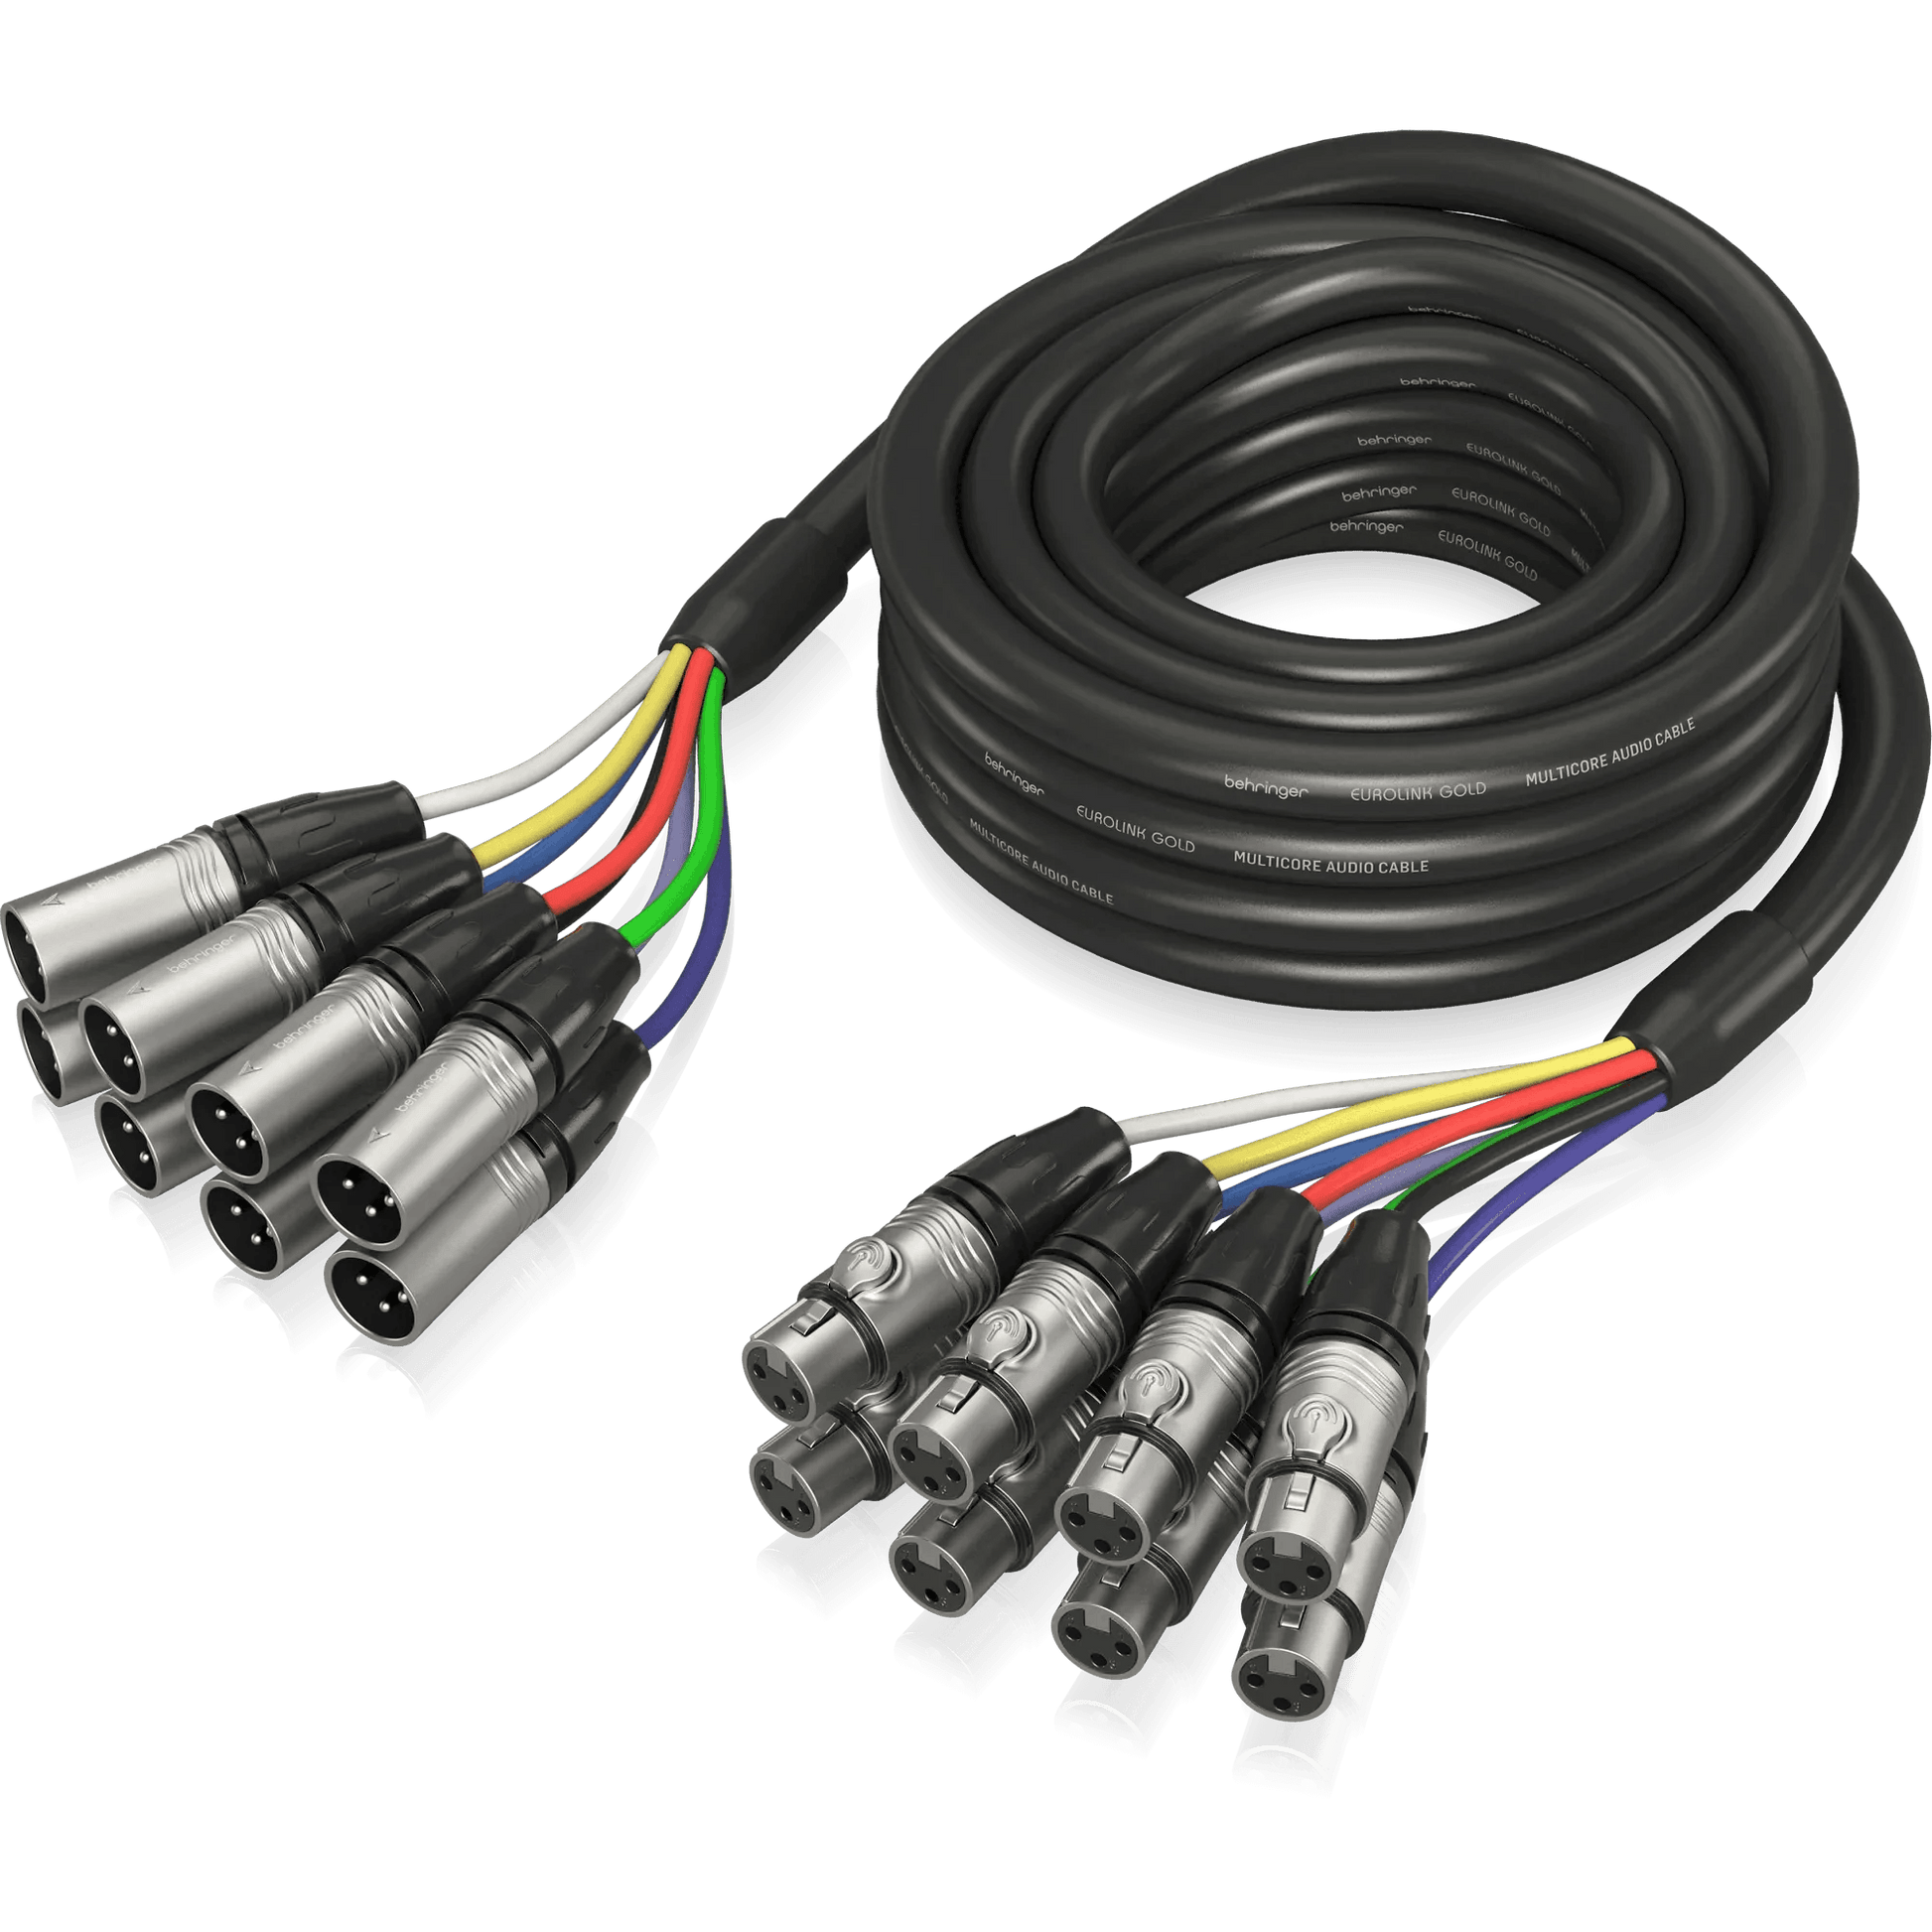 Behringer GMX-500 Gold Performance 5 m (16.4 ft) 8-Way Multicore Cable with XLR Connectors